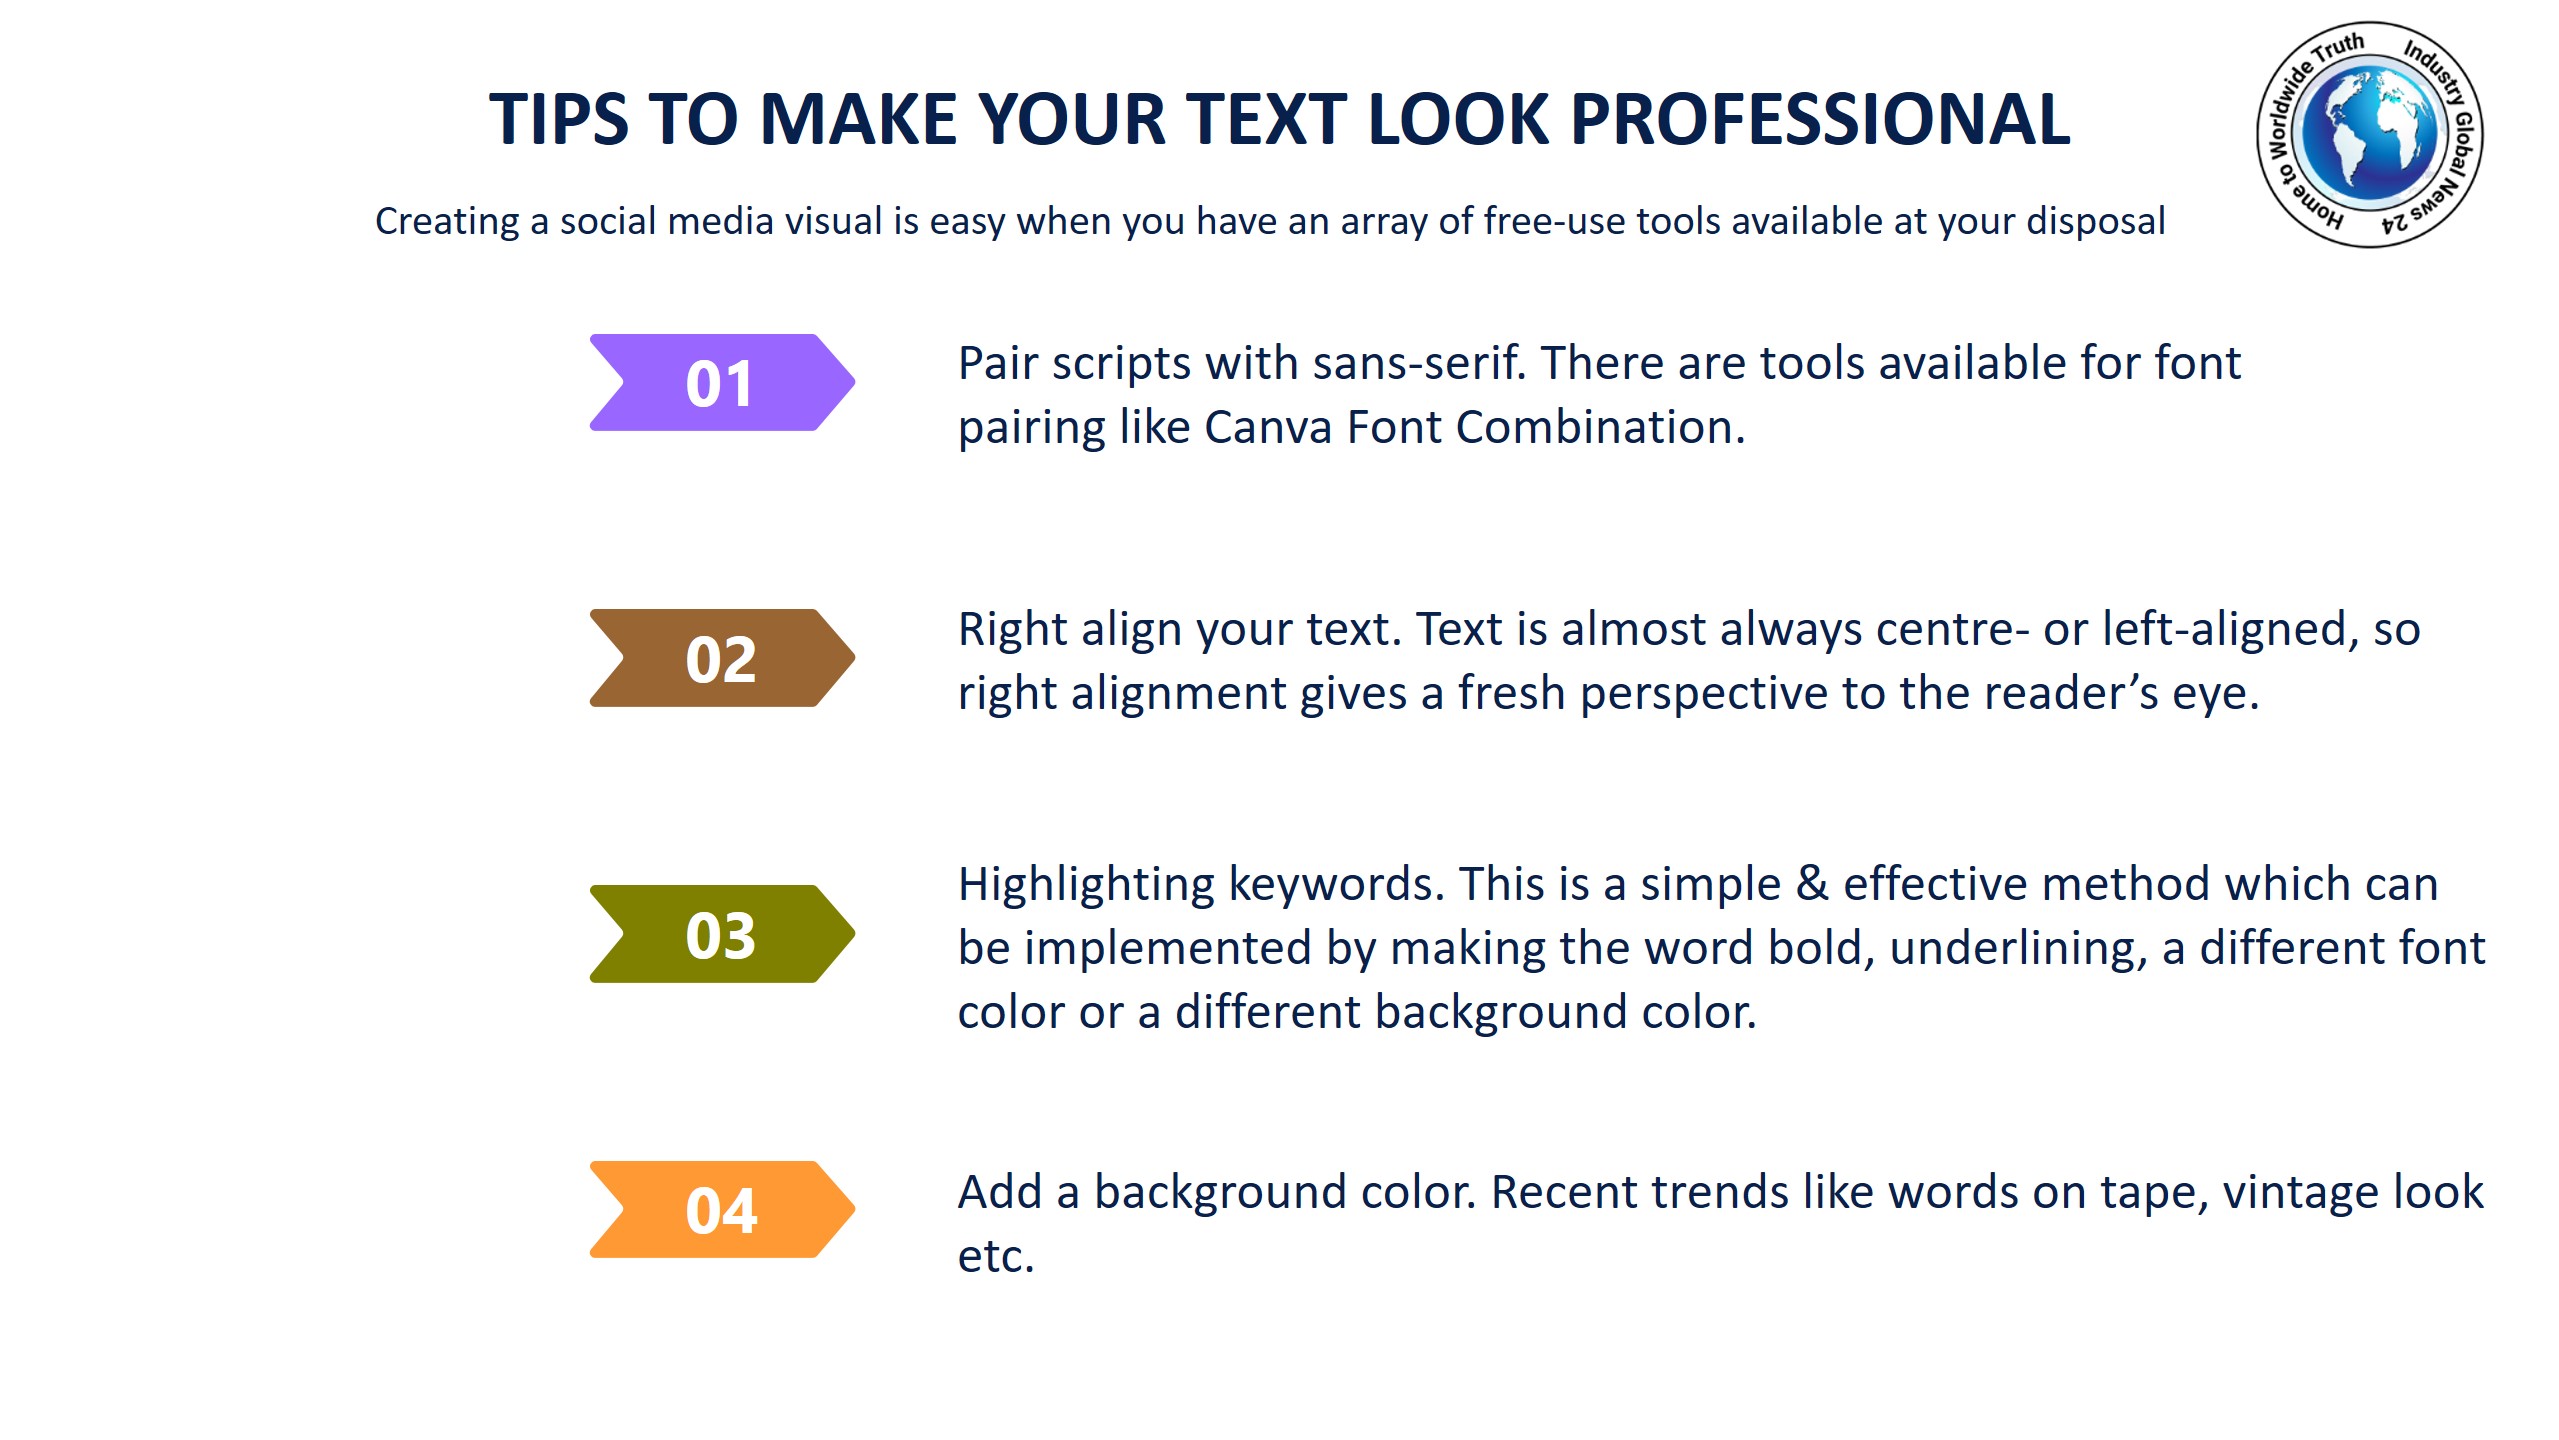 Tips to make your text look professional